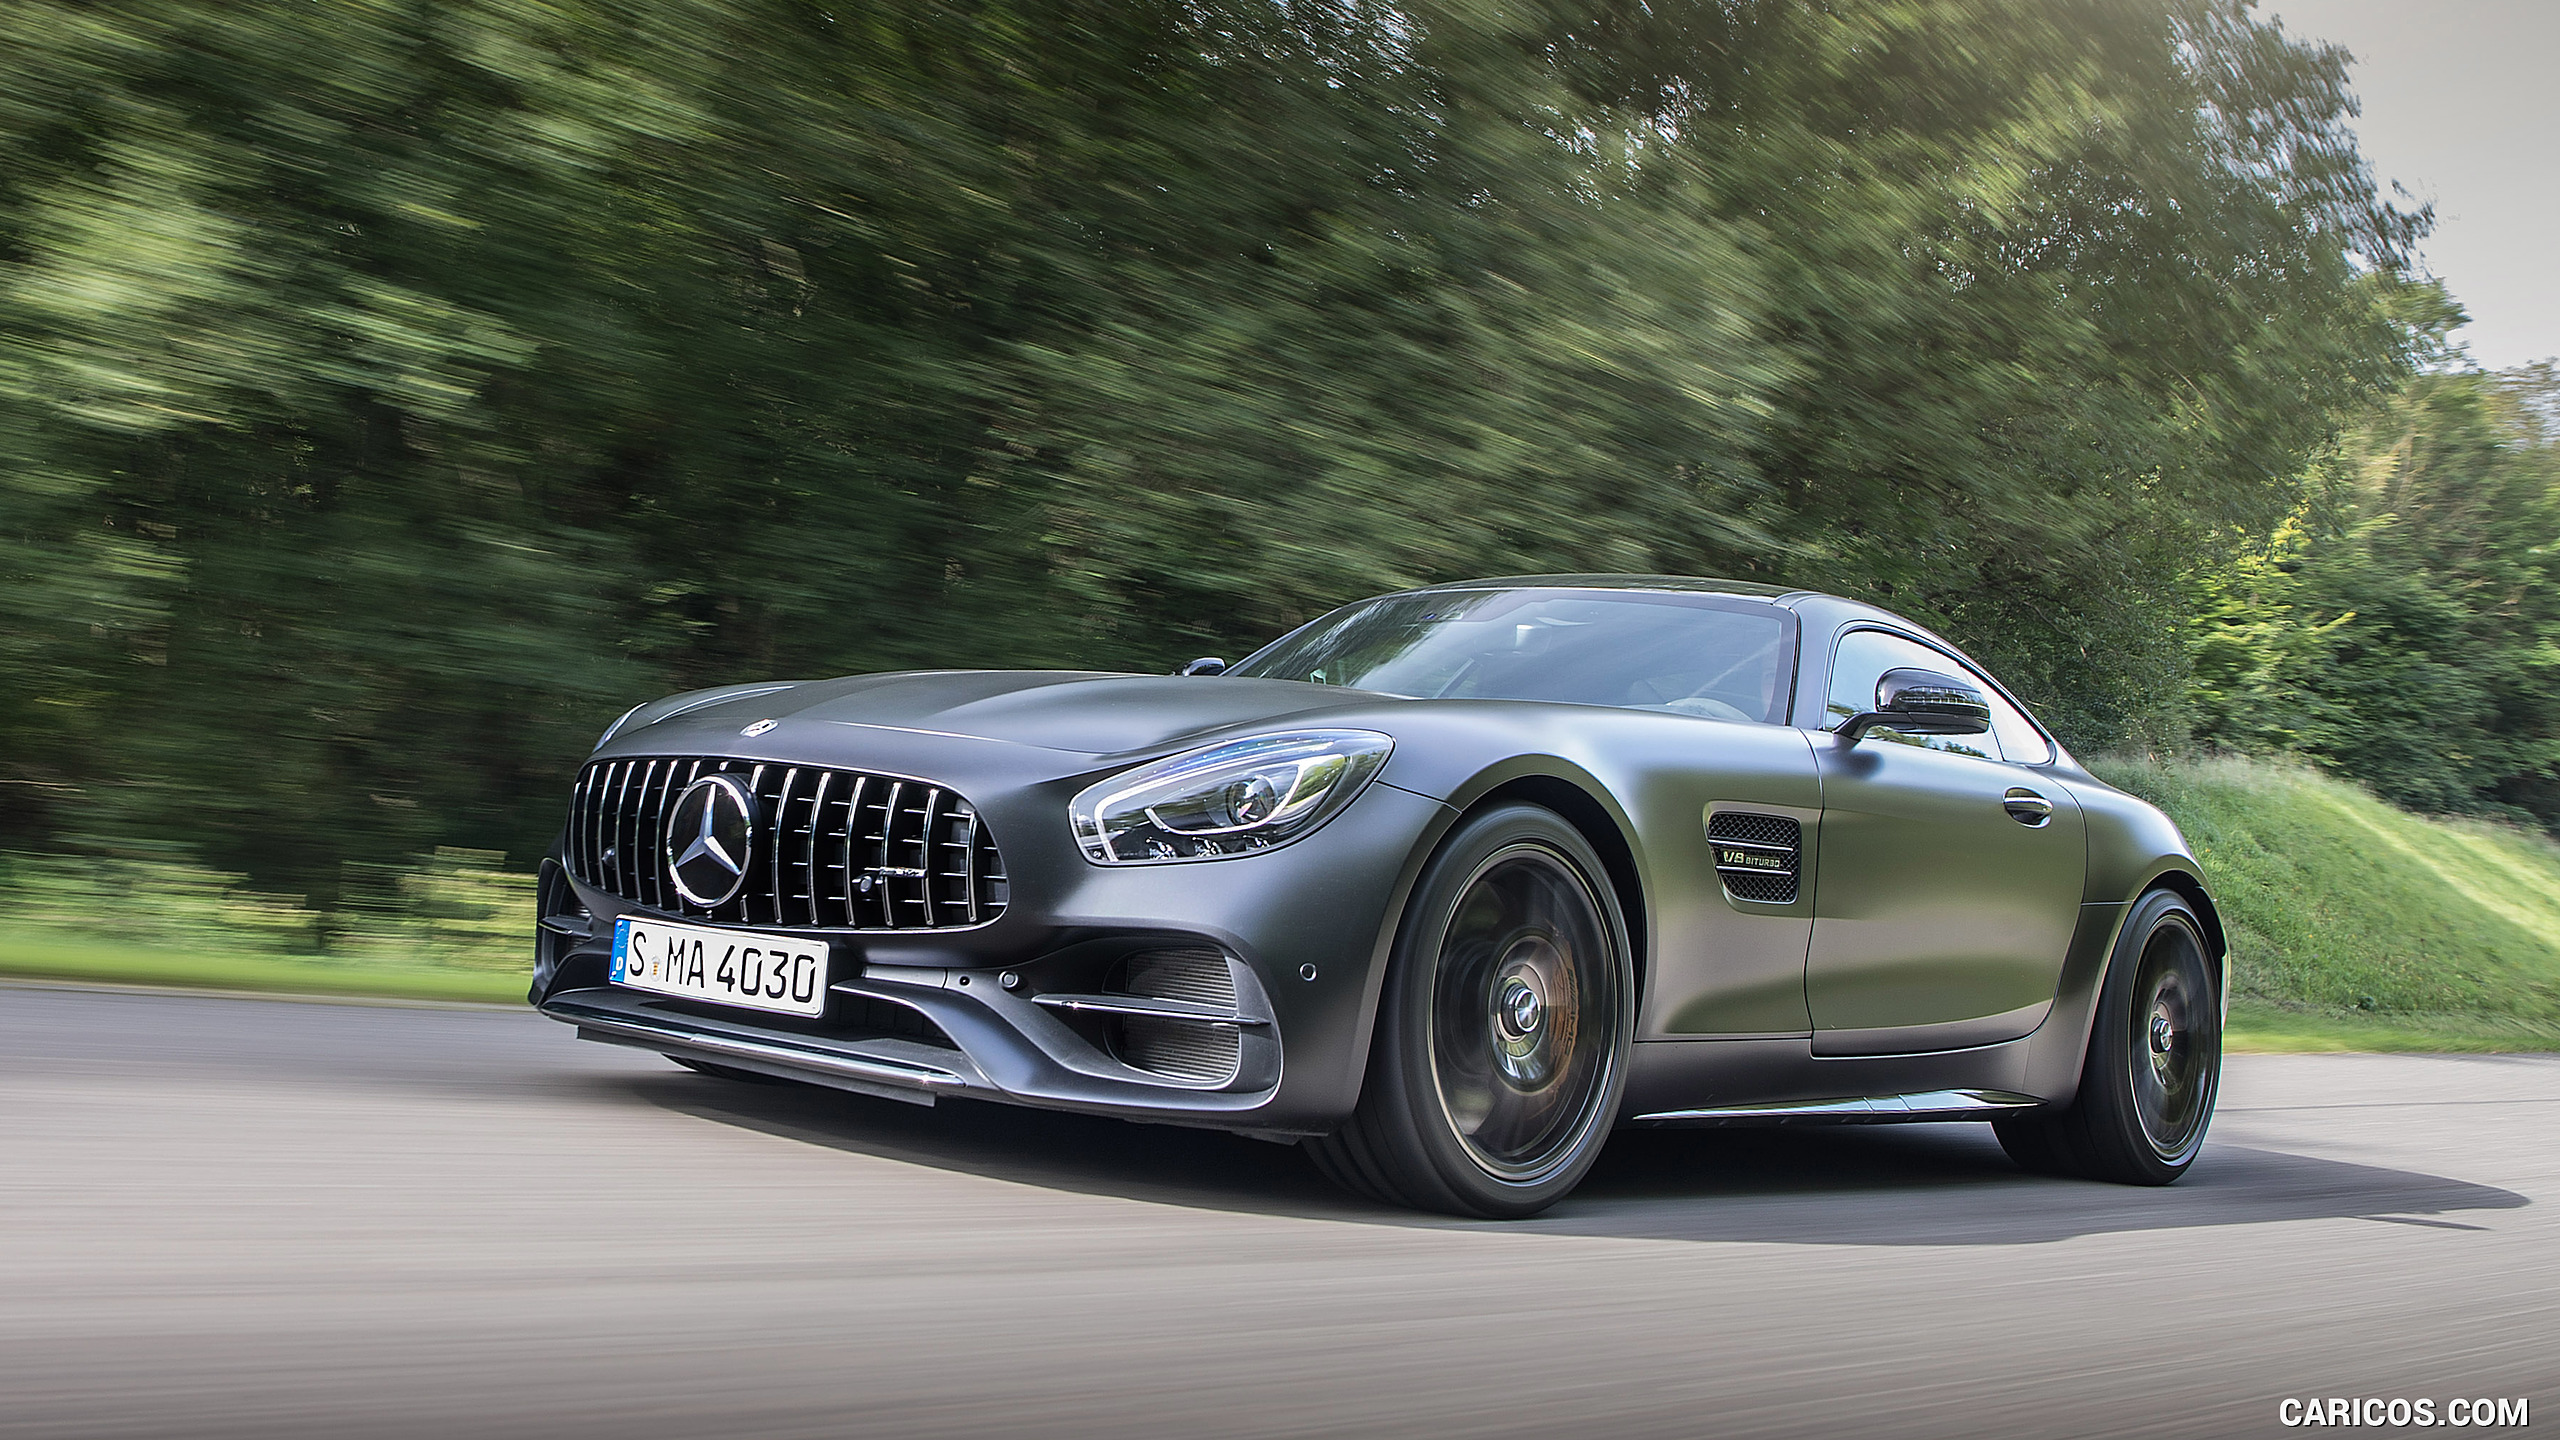 2018 Mercedes-AMG GT C Coupe Edition 50 - Front Three-Quarter, #22 of 70